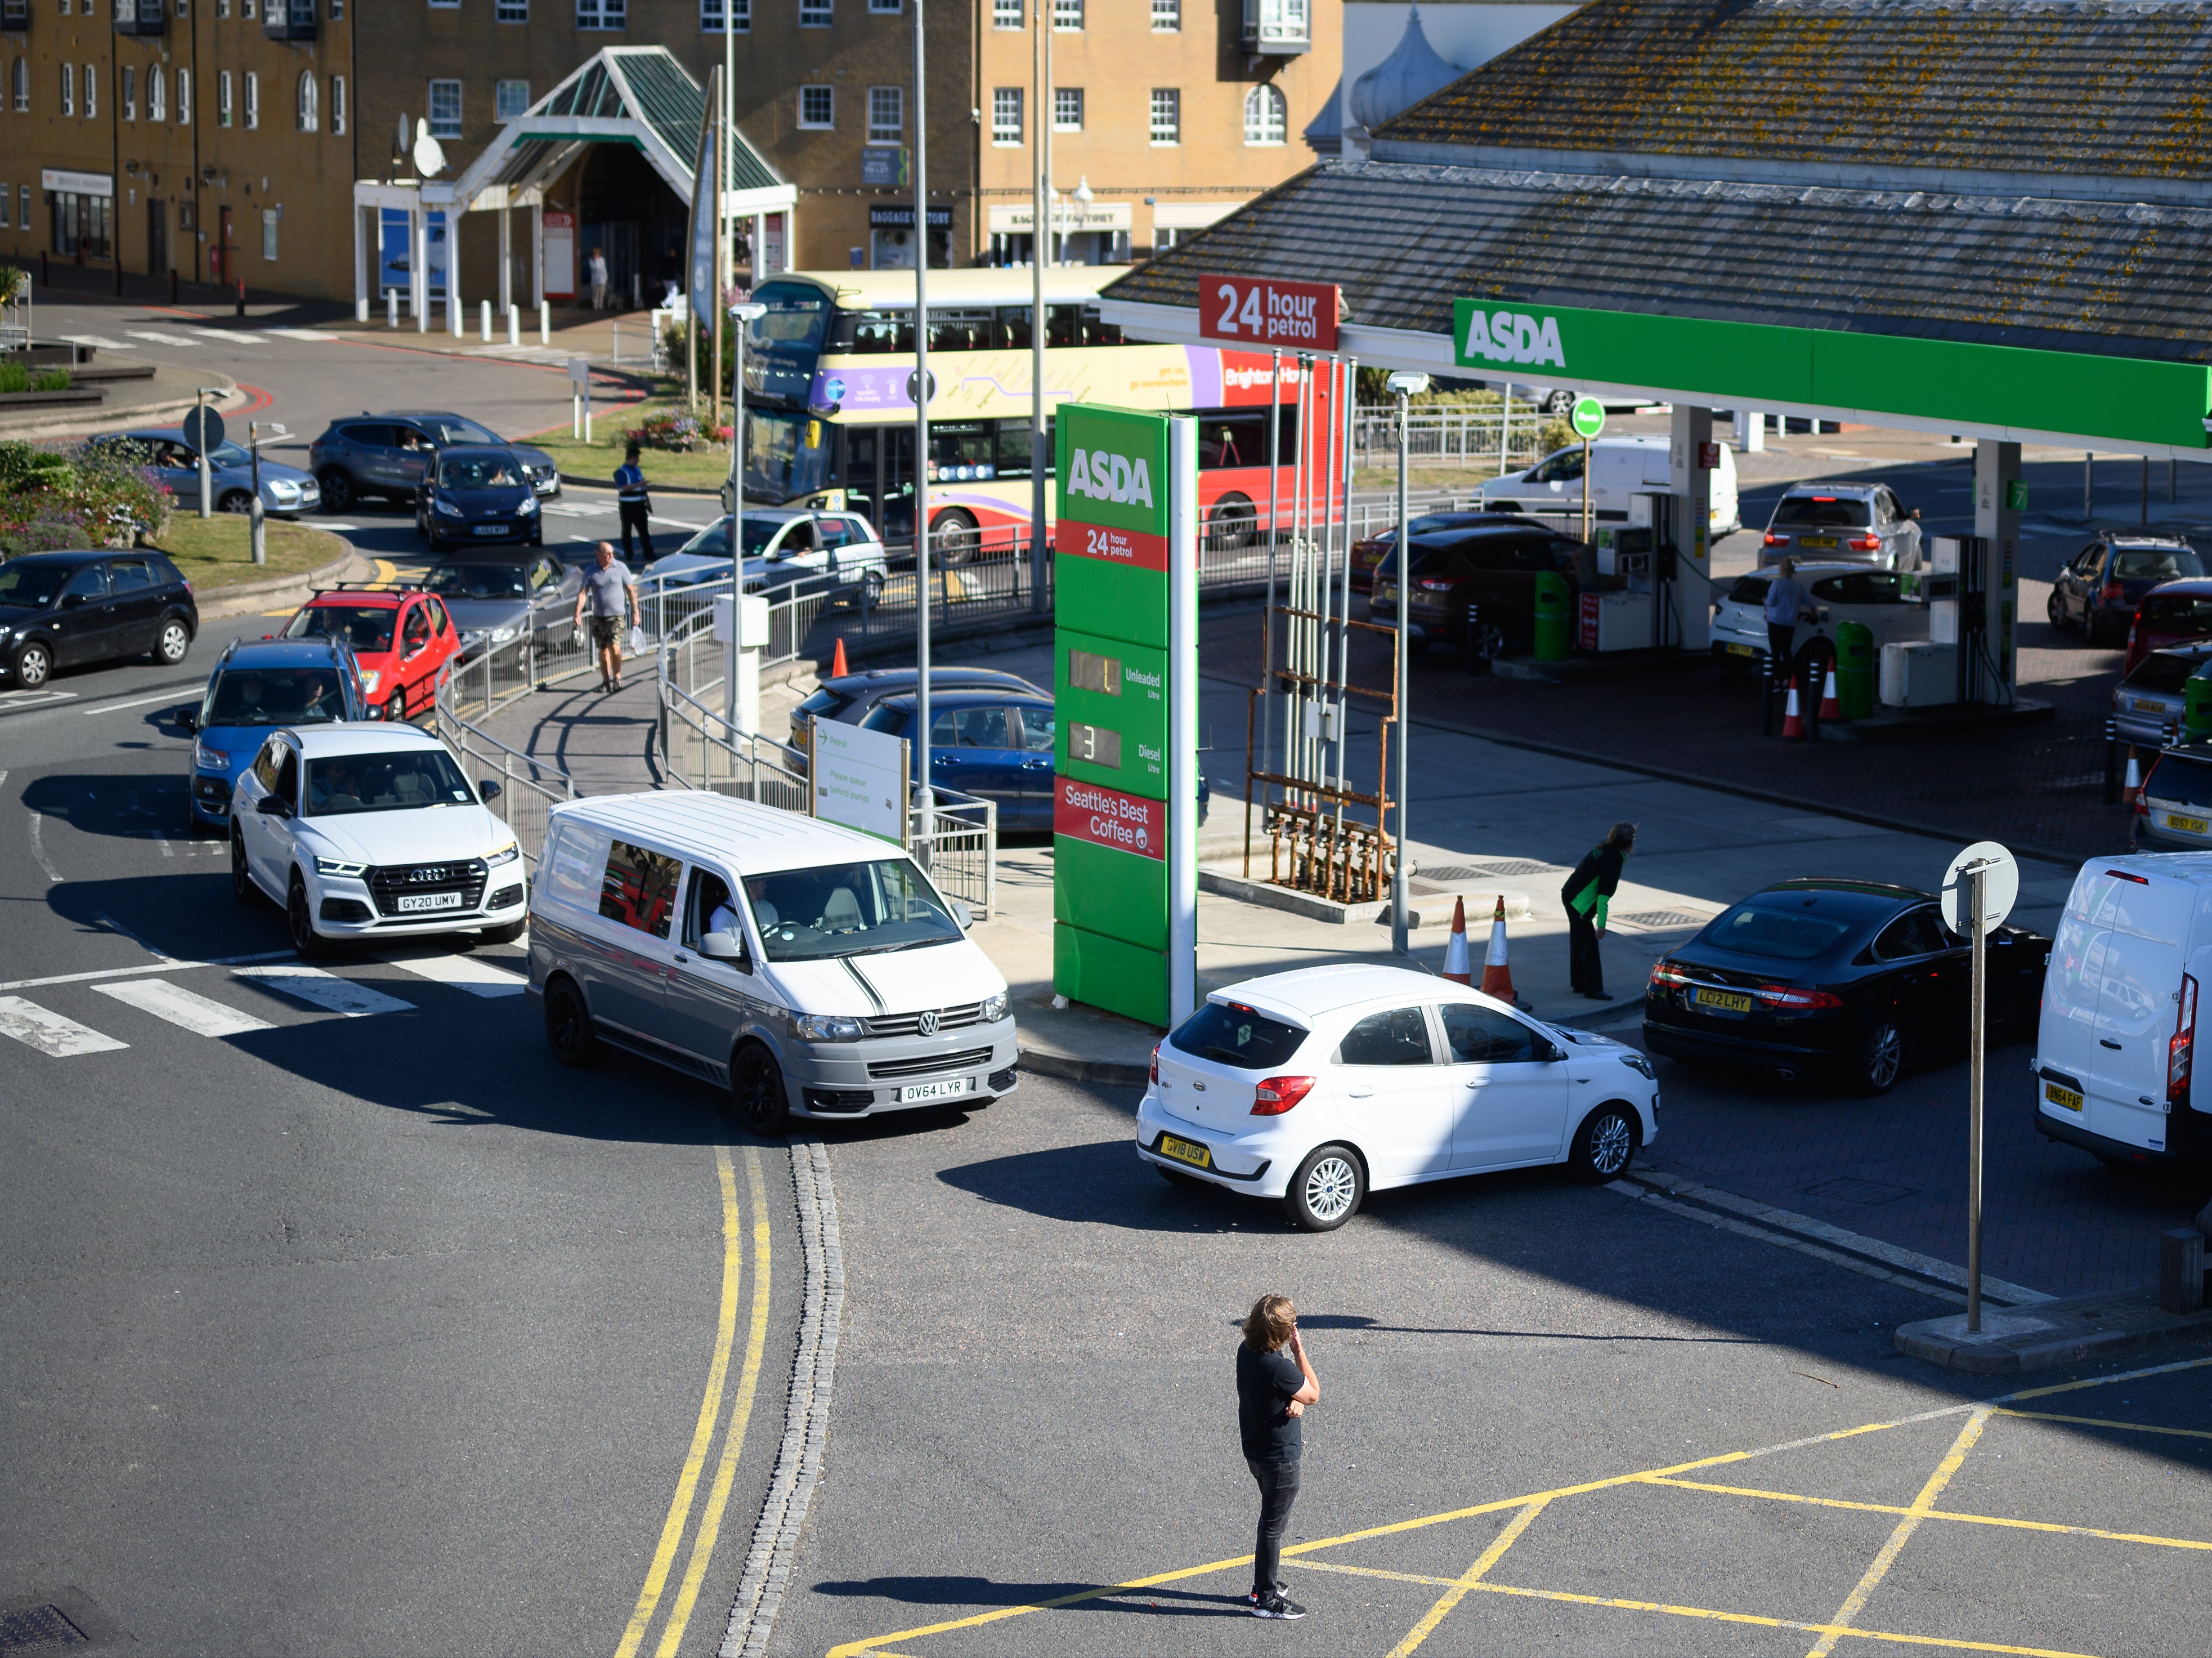 The UK is facing petrol station closures